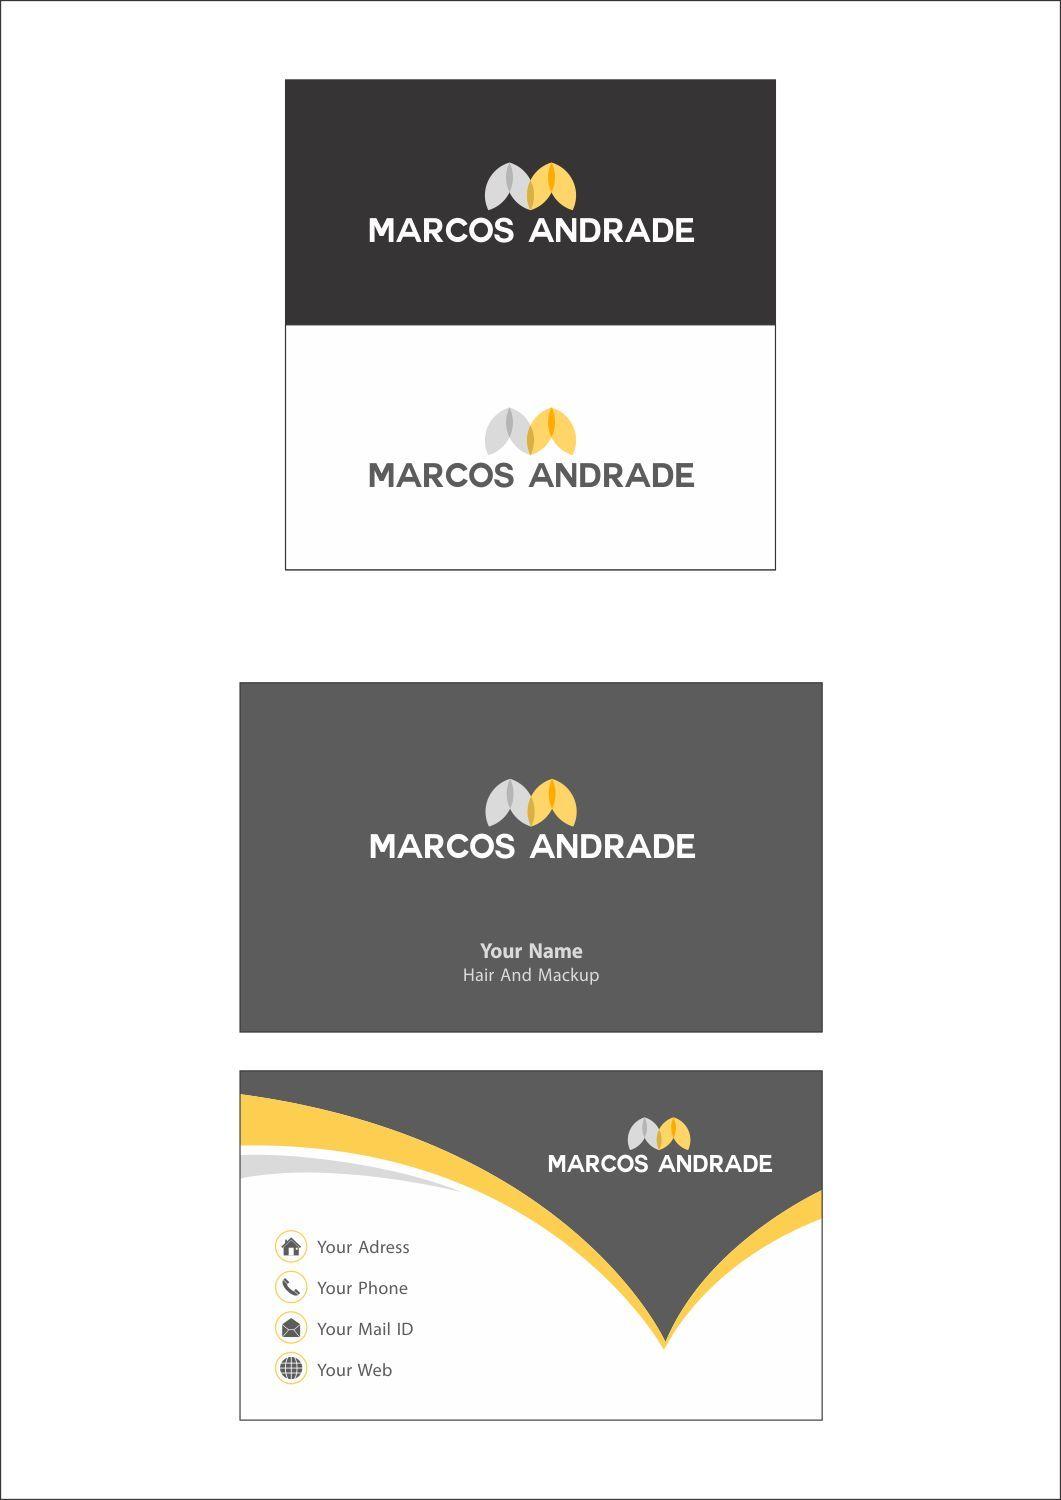 Marcos Name Logo - Modern, Conservative, Hair And Beauty Logo Design for Marcos Andrade ...